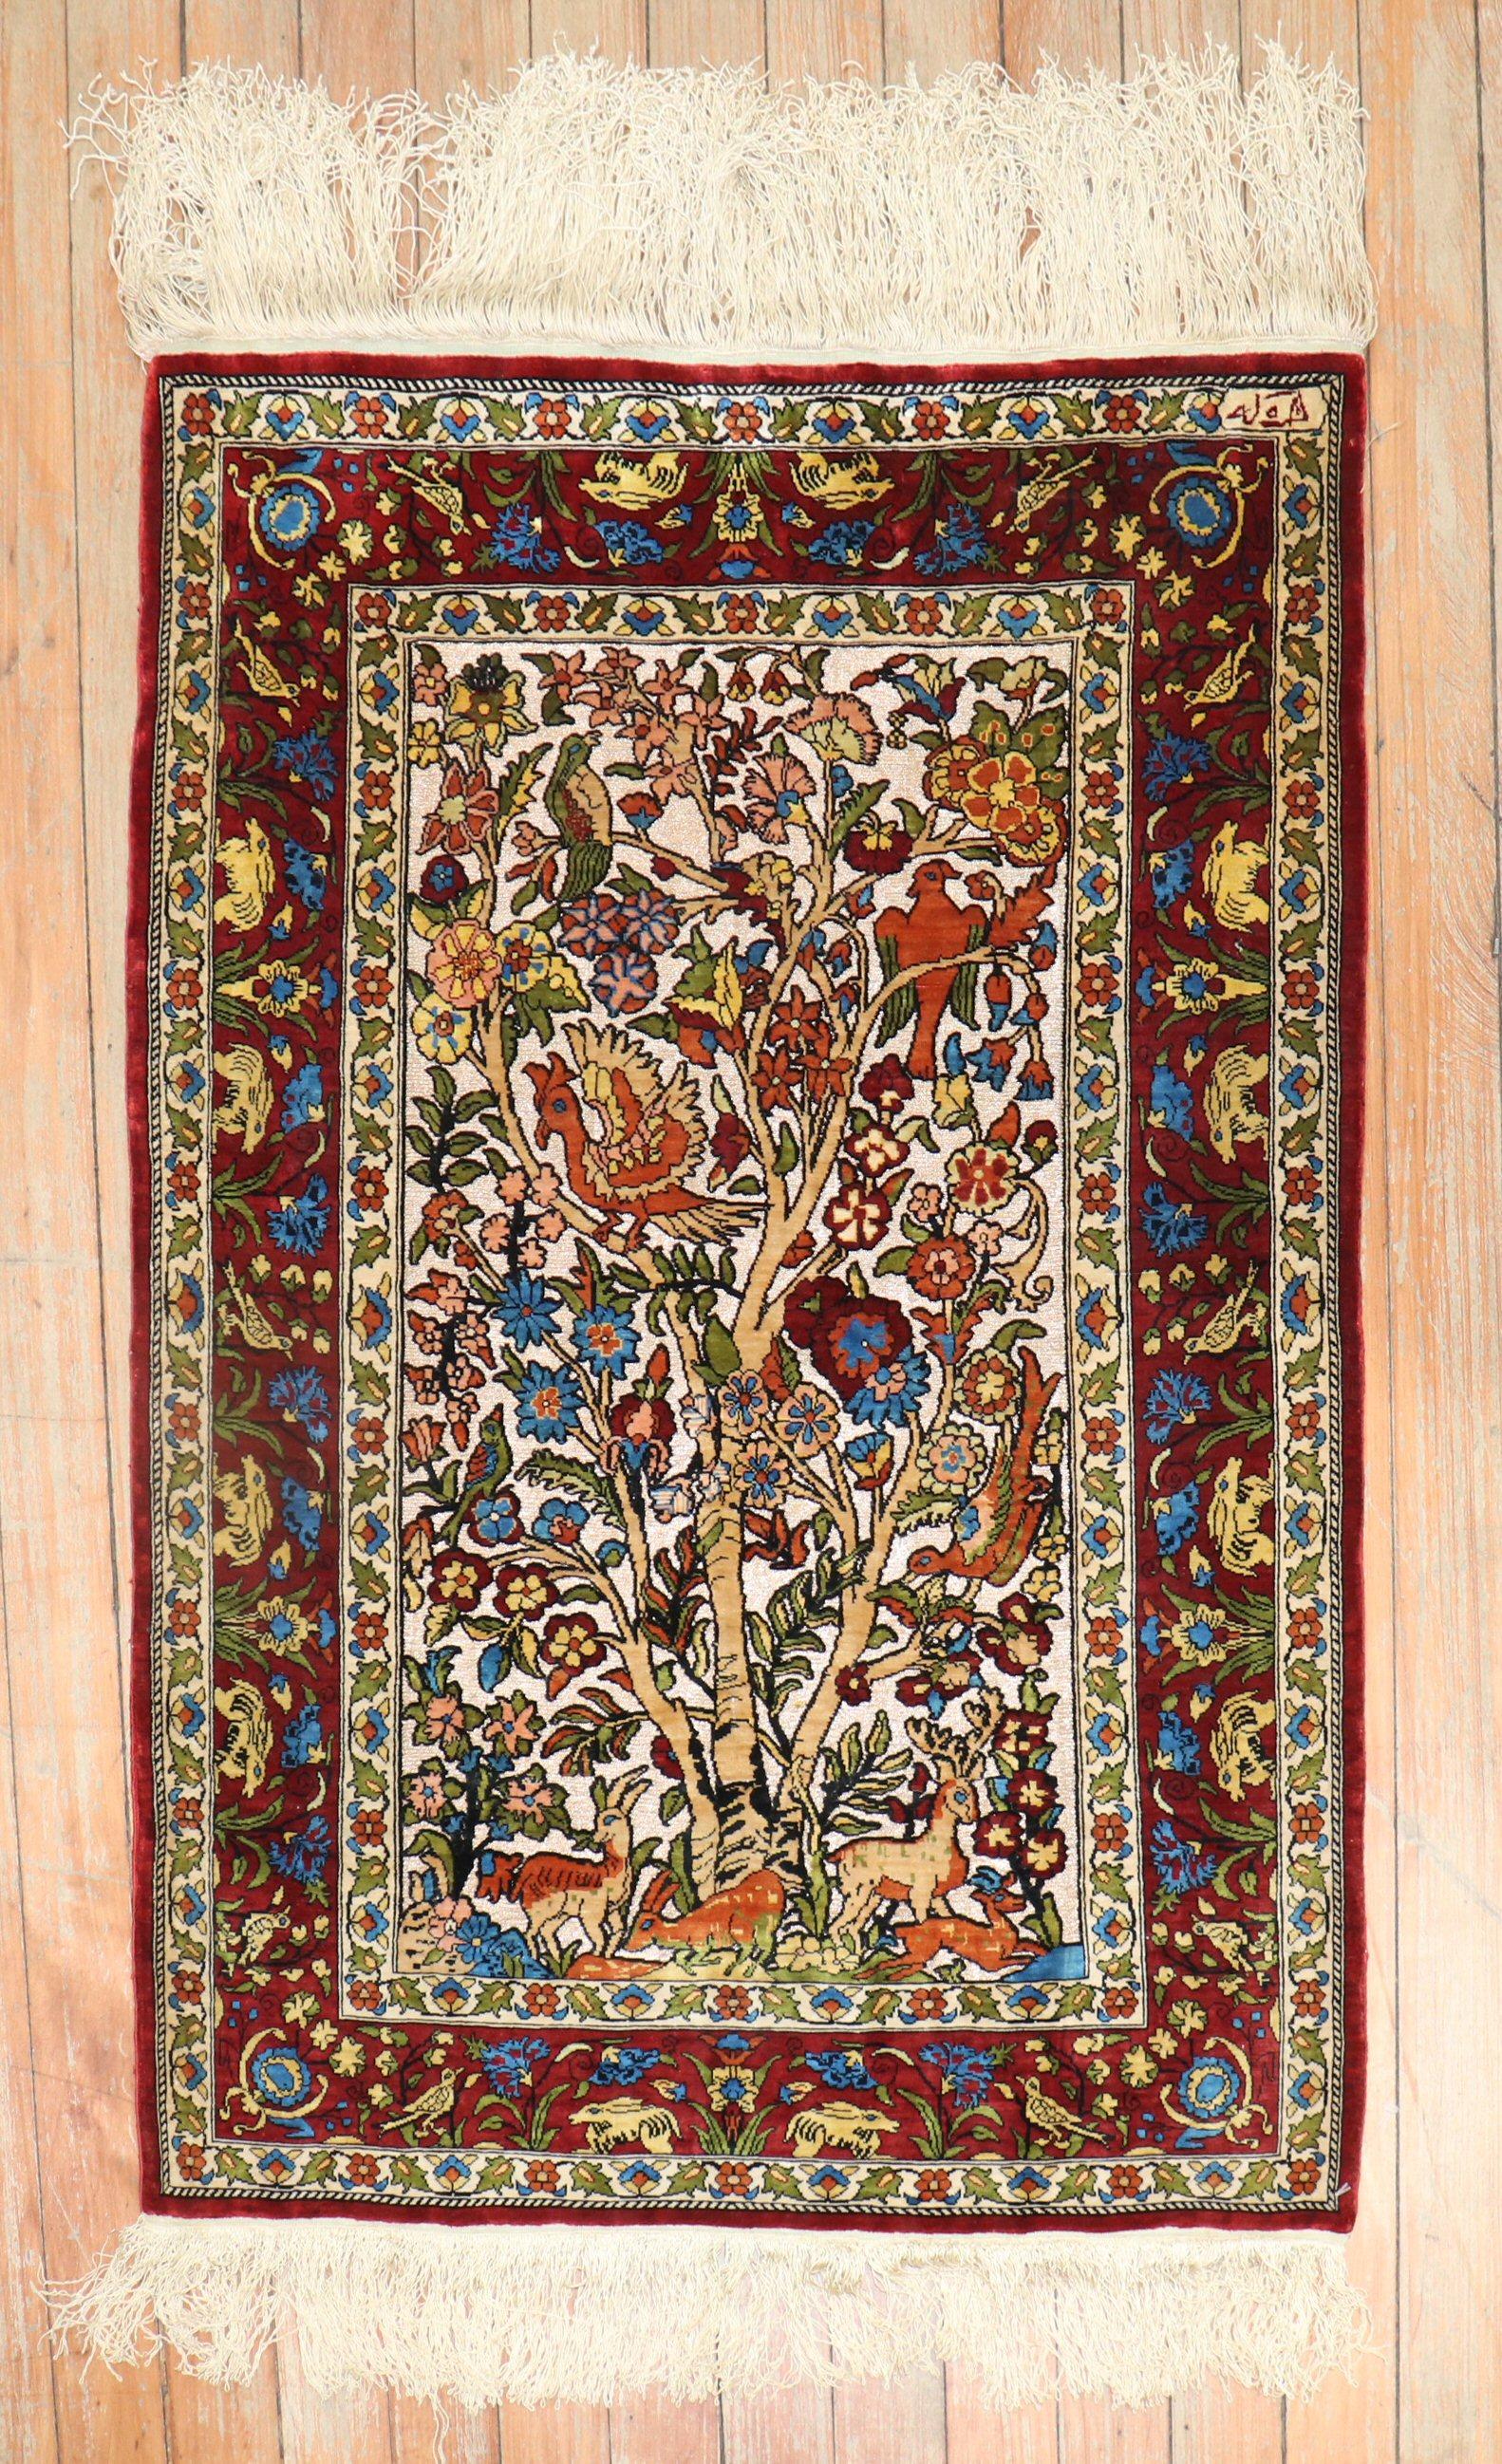 Fine Turkish silk one of a kind Herekeh rug with a beutiful pictorial animal design on an ivory field.

Measures: 2' x 2'11'.